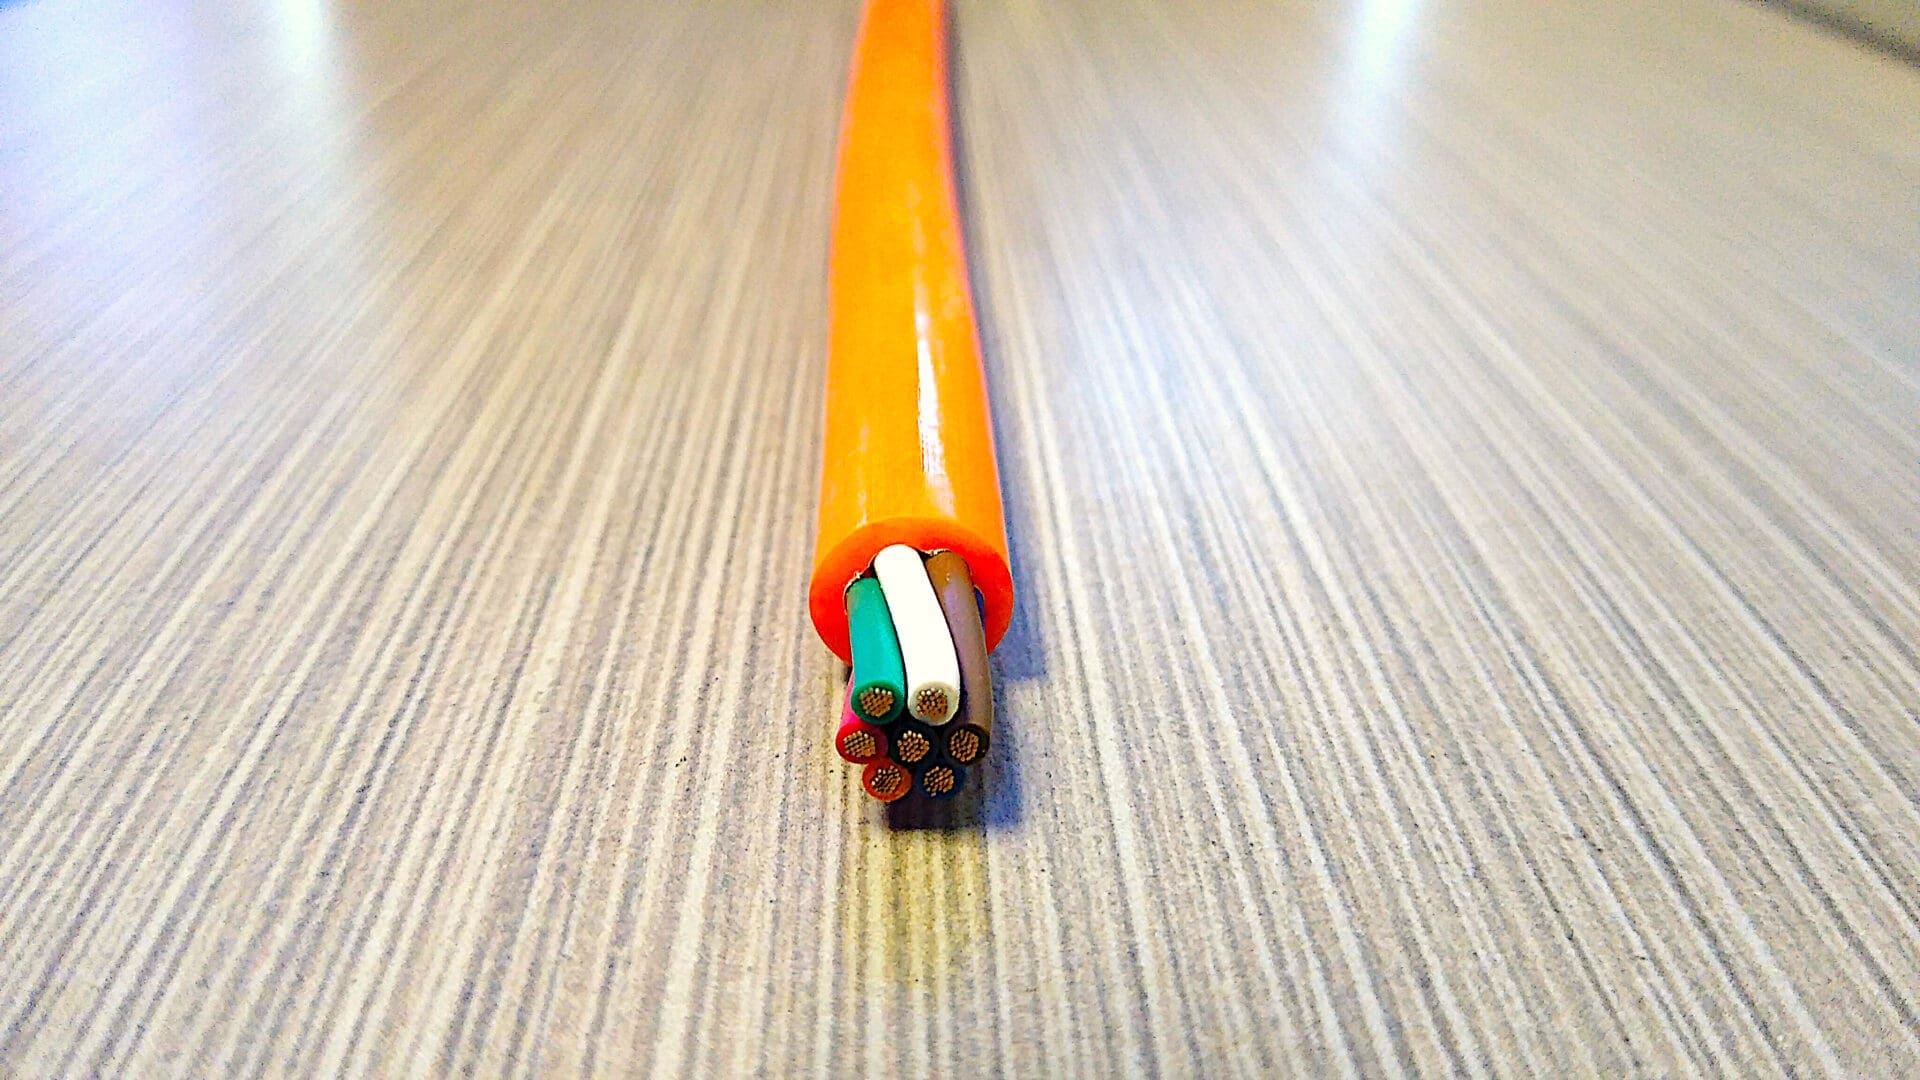 A PCE167 16 GA 7 COND. 300V COIL CABLE MAX DUTY is sitting on top of a table.